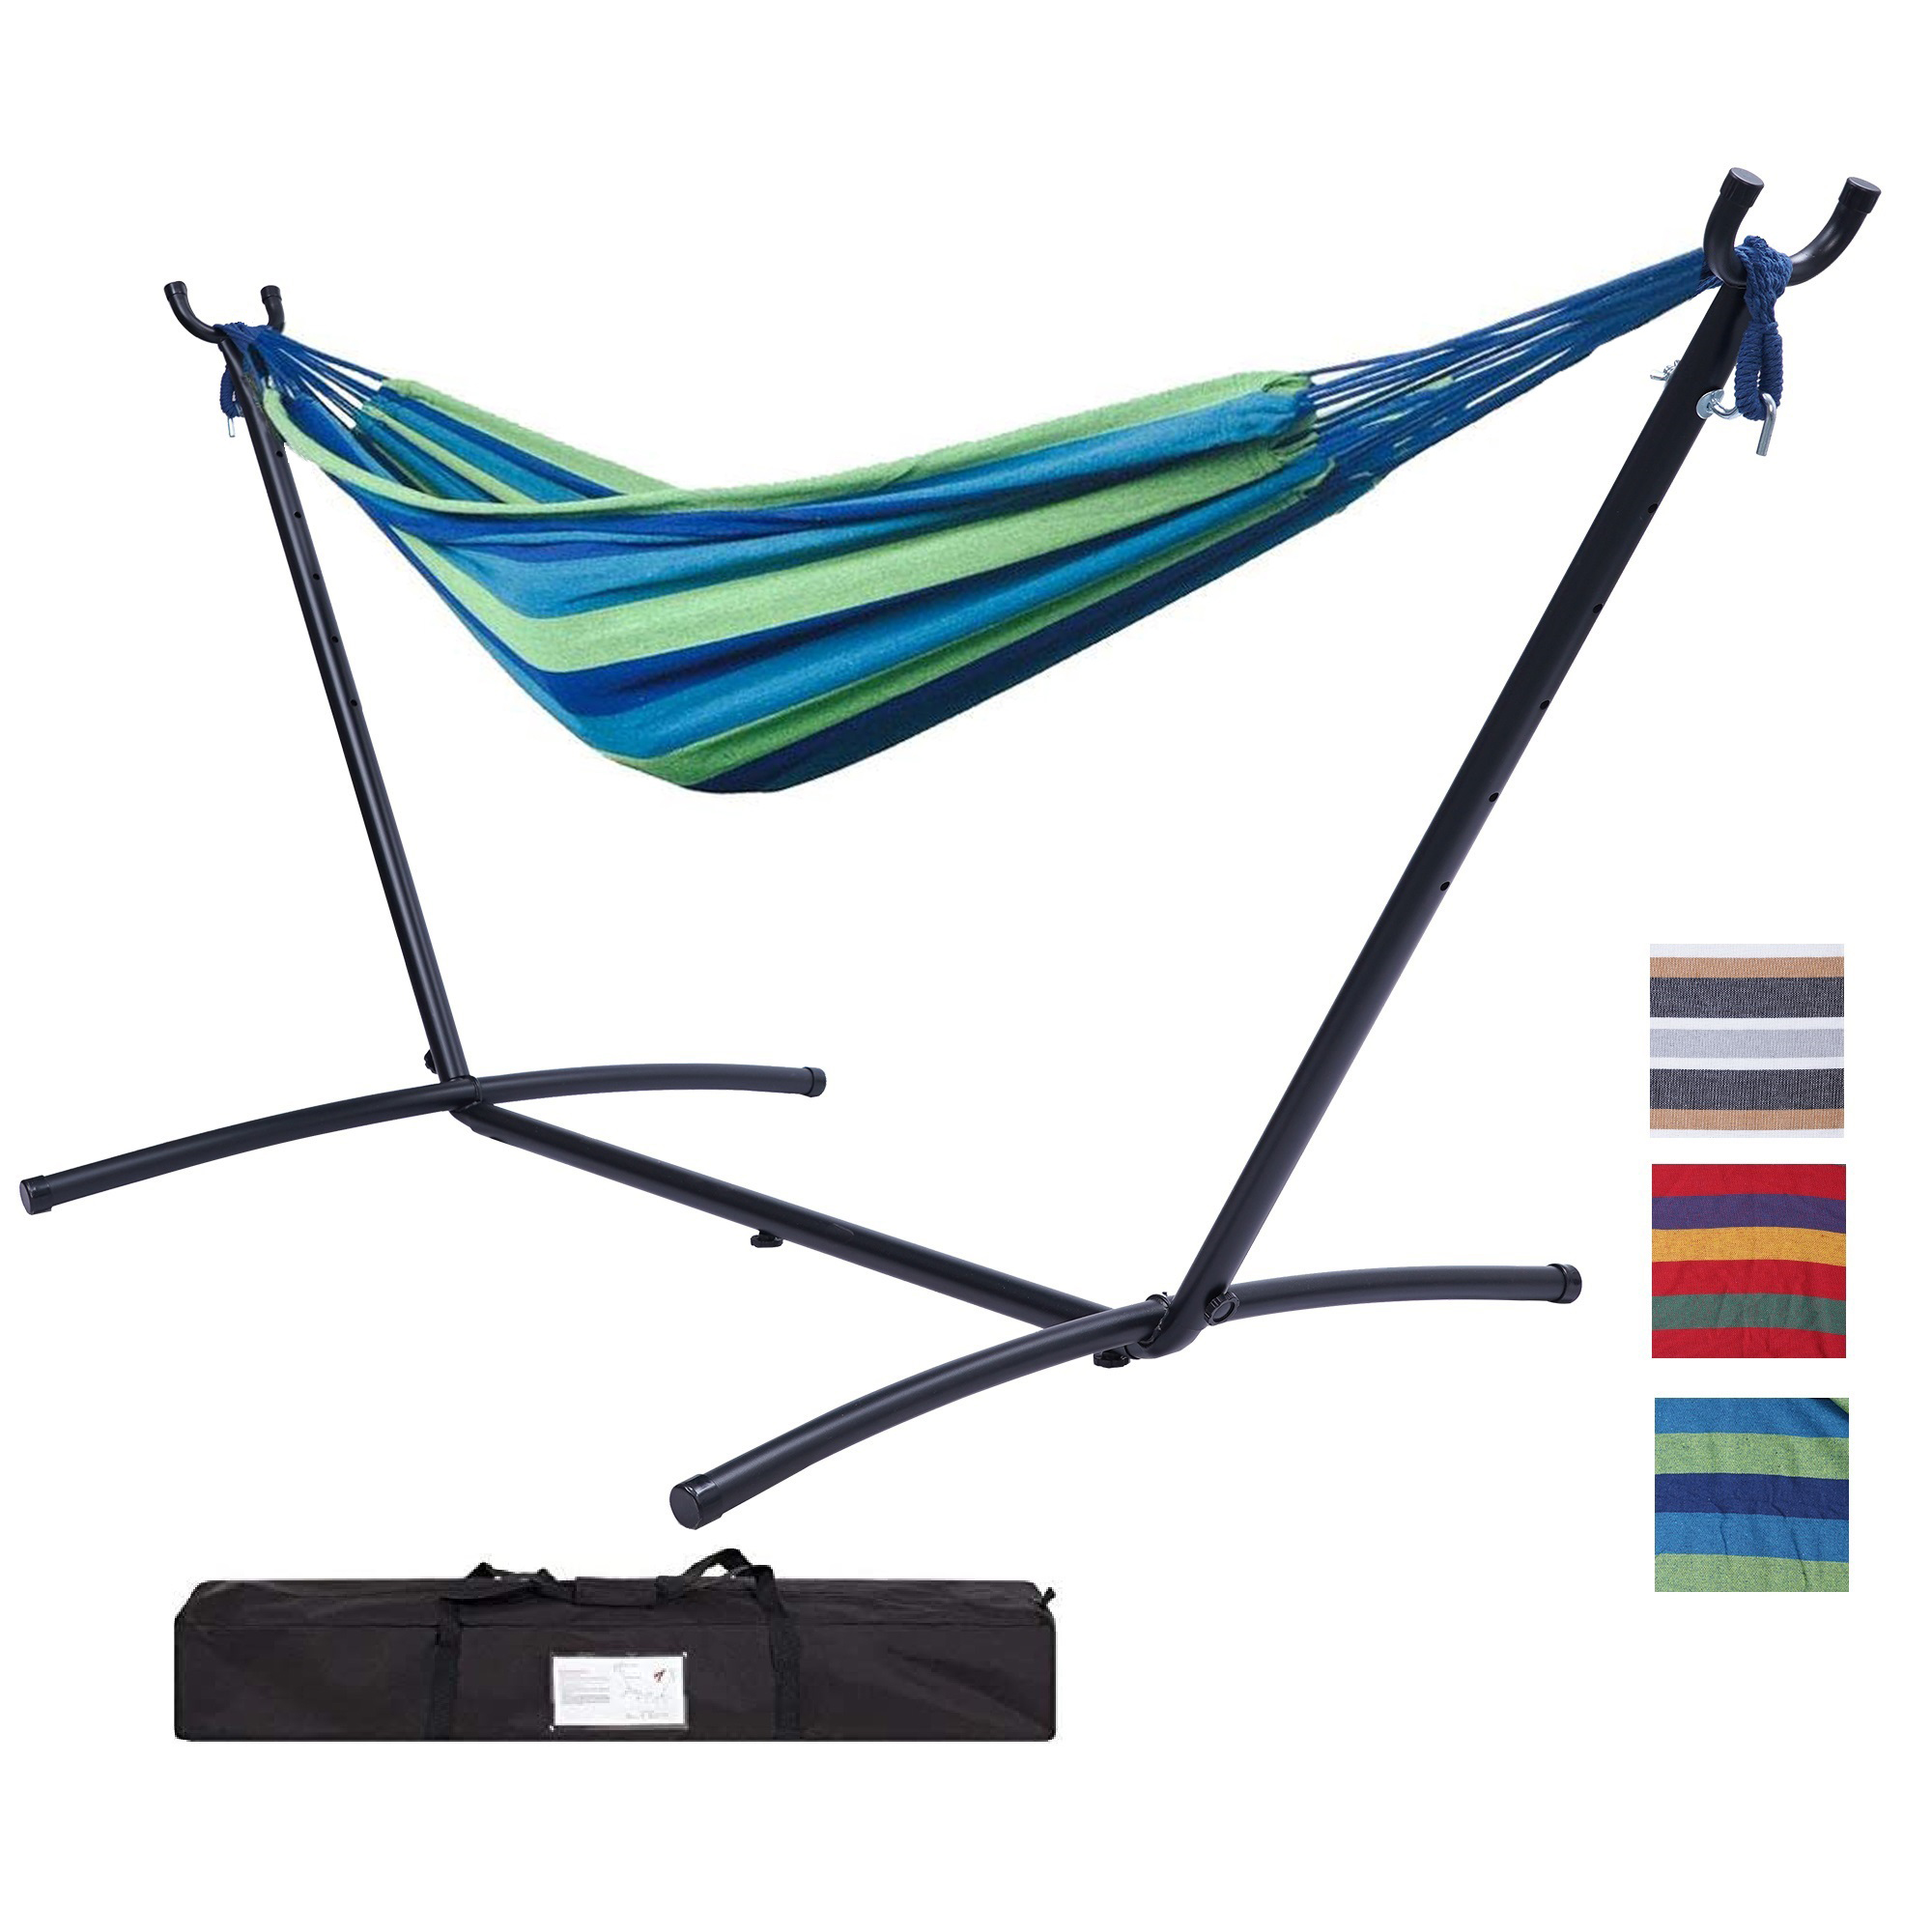 Casainc 9.3 ft. Double Classic Outdoor Cotton Hammock Chair Hammock with Stand for 2-Person in Calming Sea-CASAINC